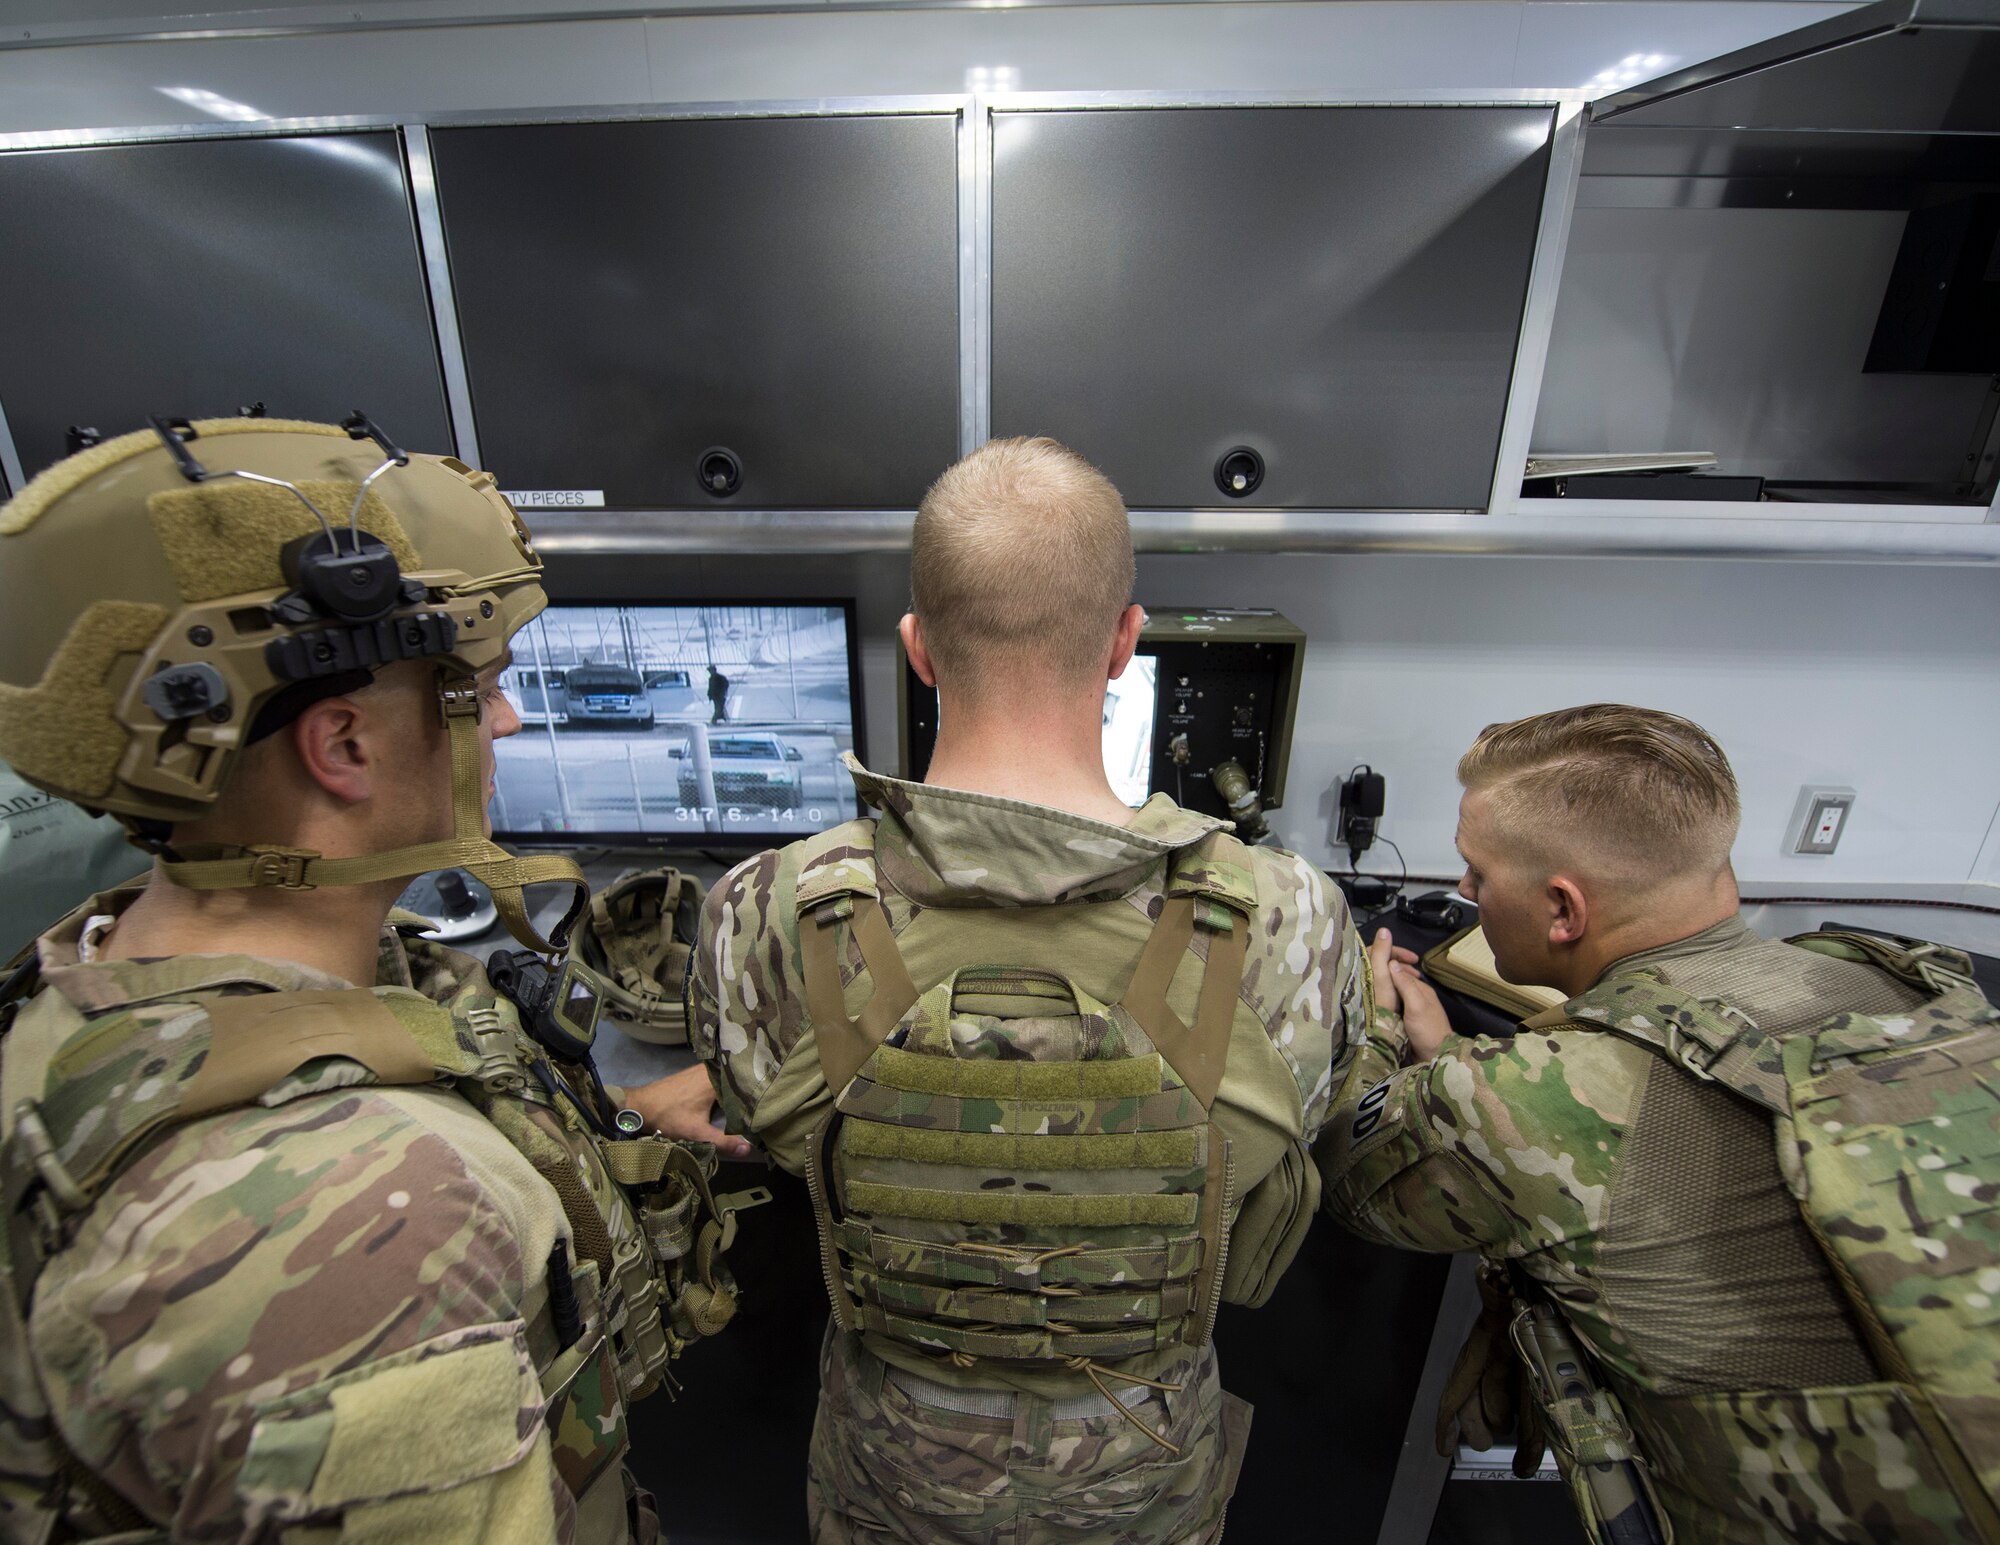 U.S. Air Force Staff Sgt. Brian Vosper, left, team leader, Senior Airman Luke Bryant, team member and robot operator, and Staff Sgt. Weston Cobb, team member, with the 379th Expeditionary Civil Engineer Squadron Explosive Ordnance Disposal Flight, reviews camera footage from a Remotec ANDROS F6A heavy-duty robot at Al Udeid Air Base, Qatar, Aug. 26, 2017.